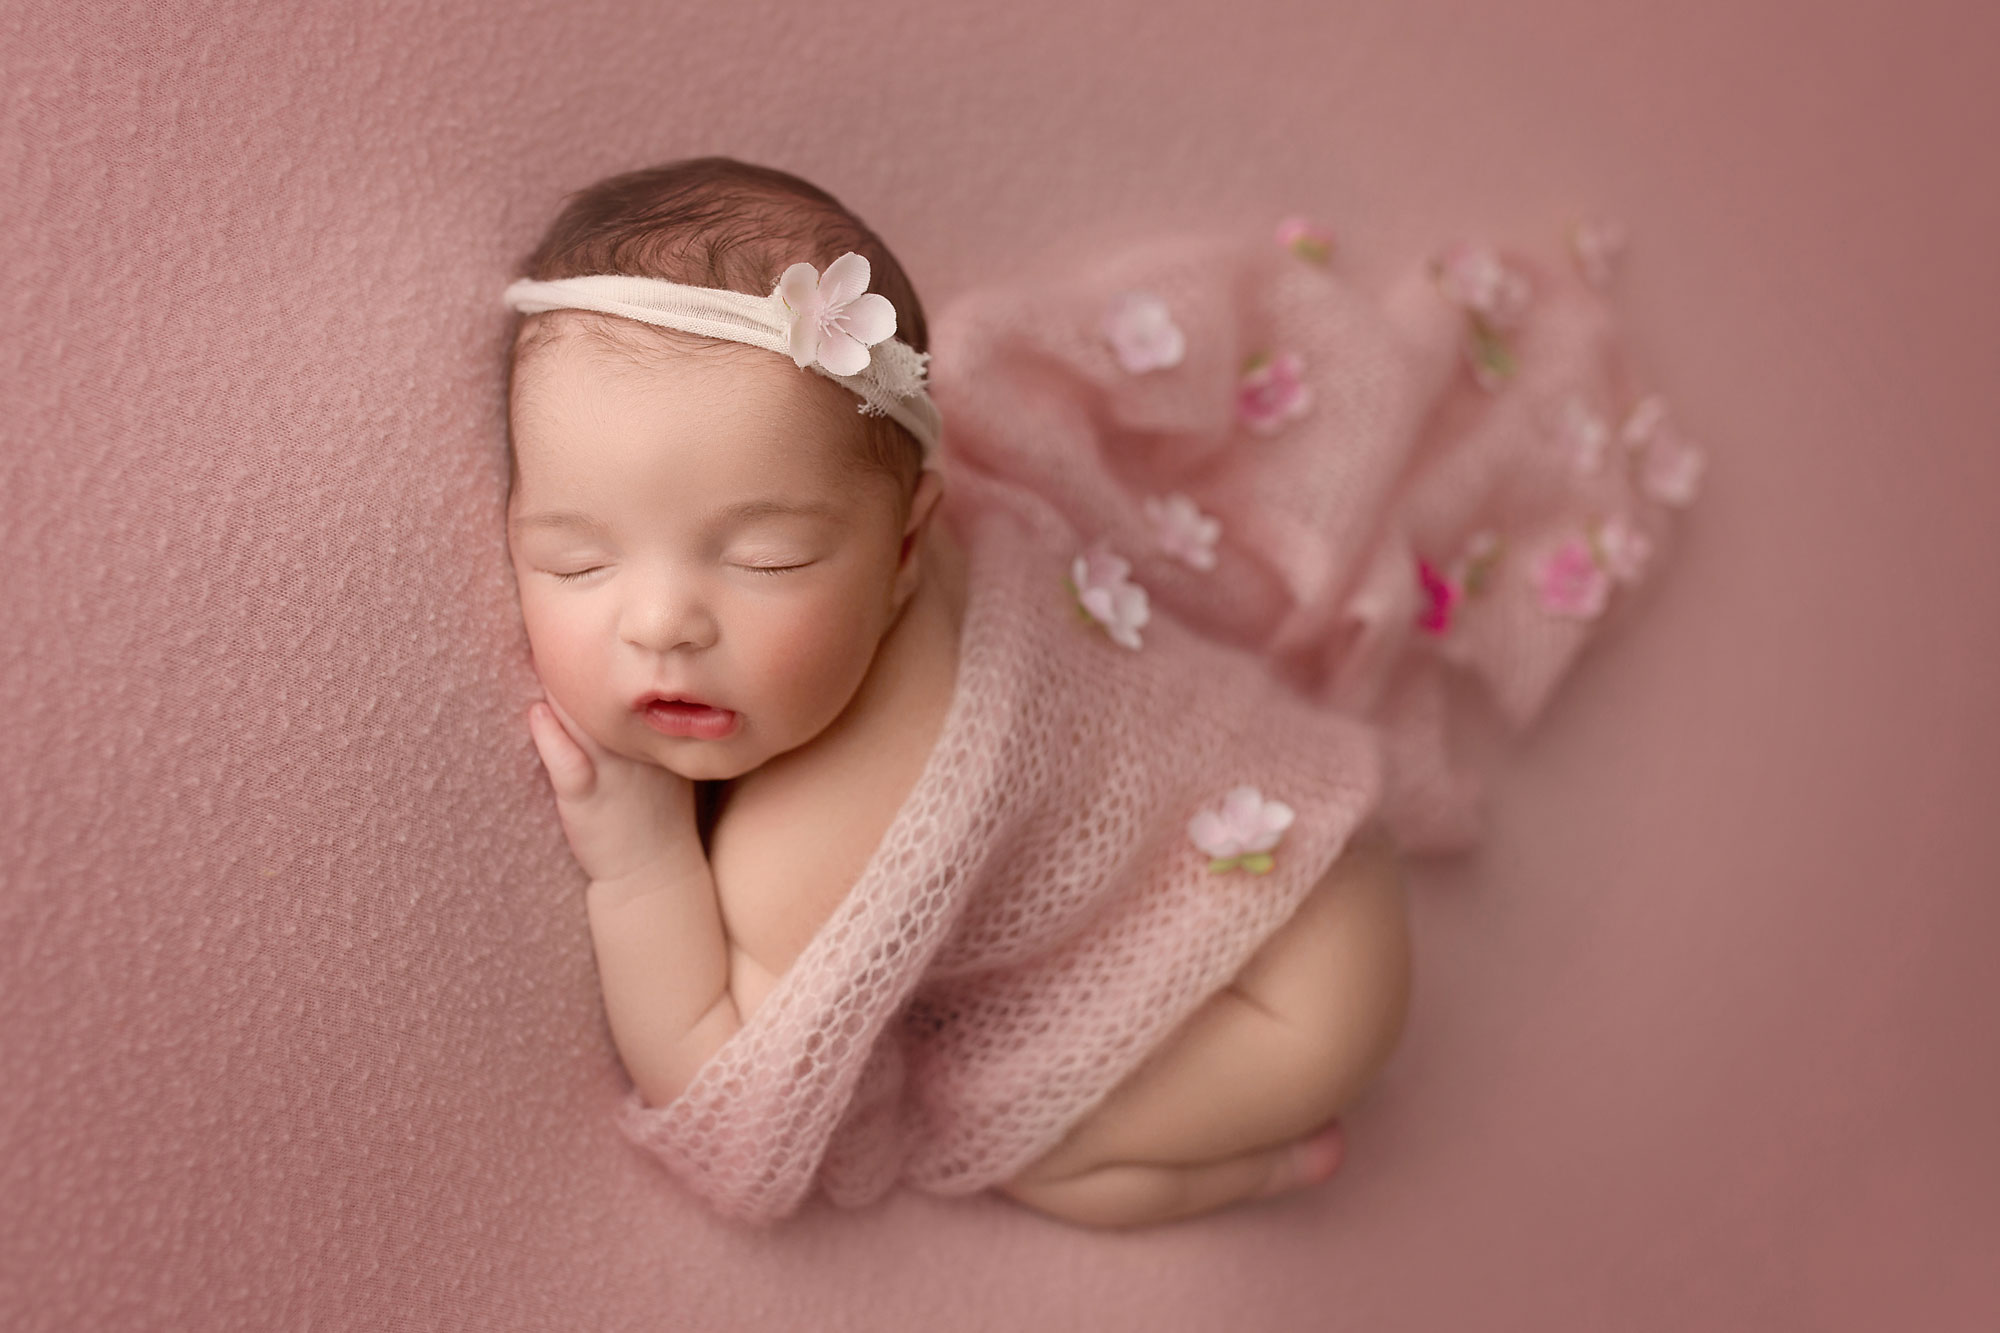 newborn photography session morris county nj, baby girl asleep in pink flower blanket